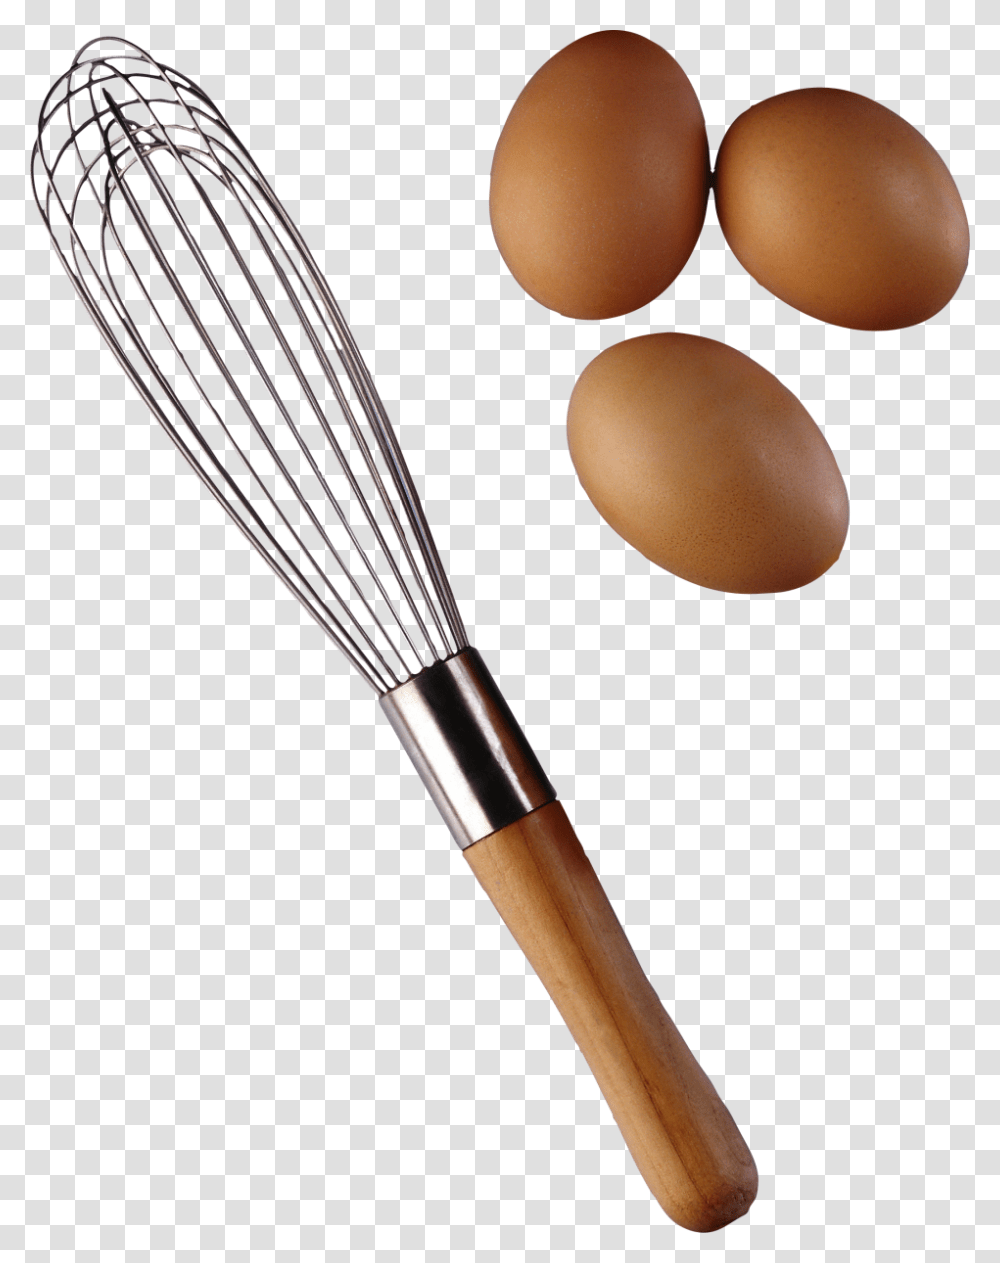 Egg, Food, Appliance, Mixer, Spoon Transparent Png